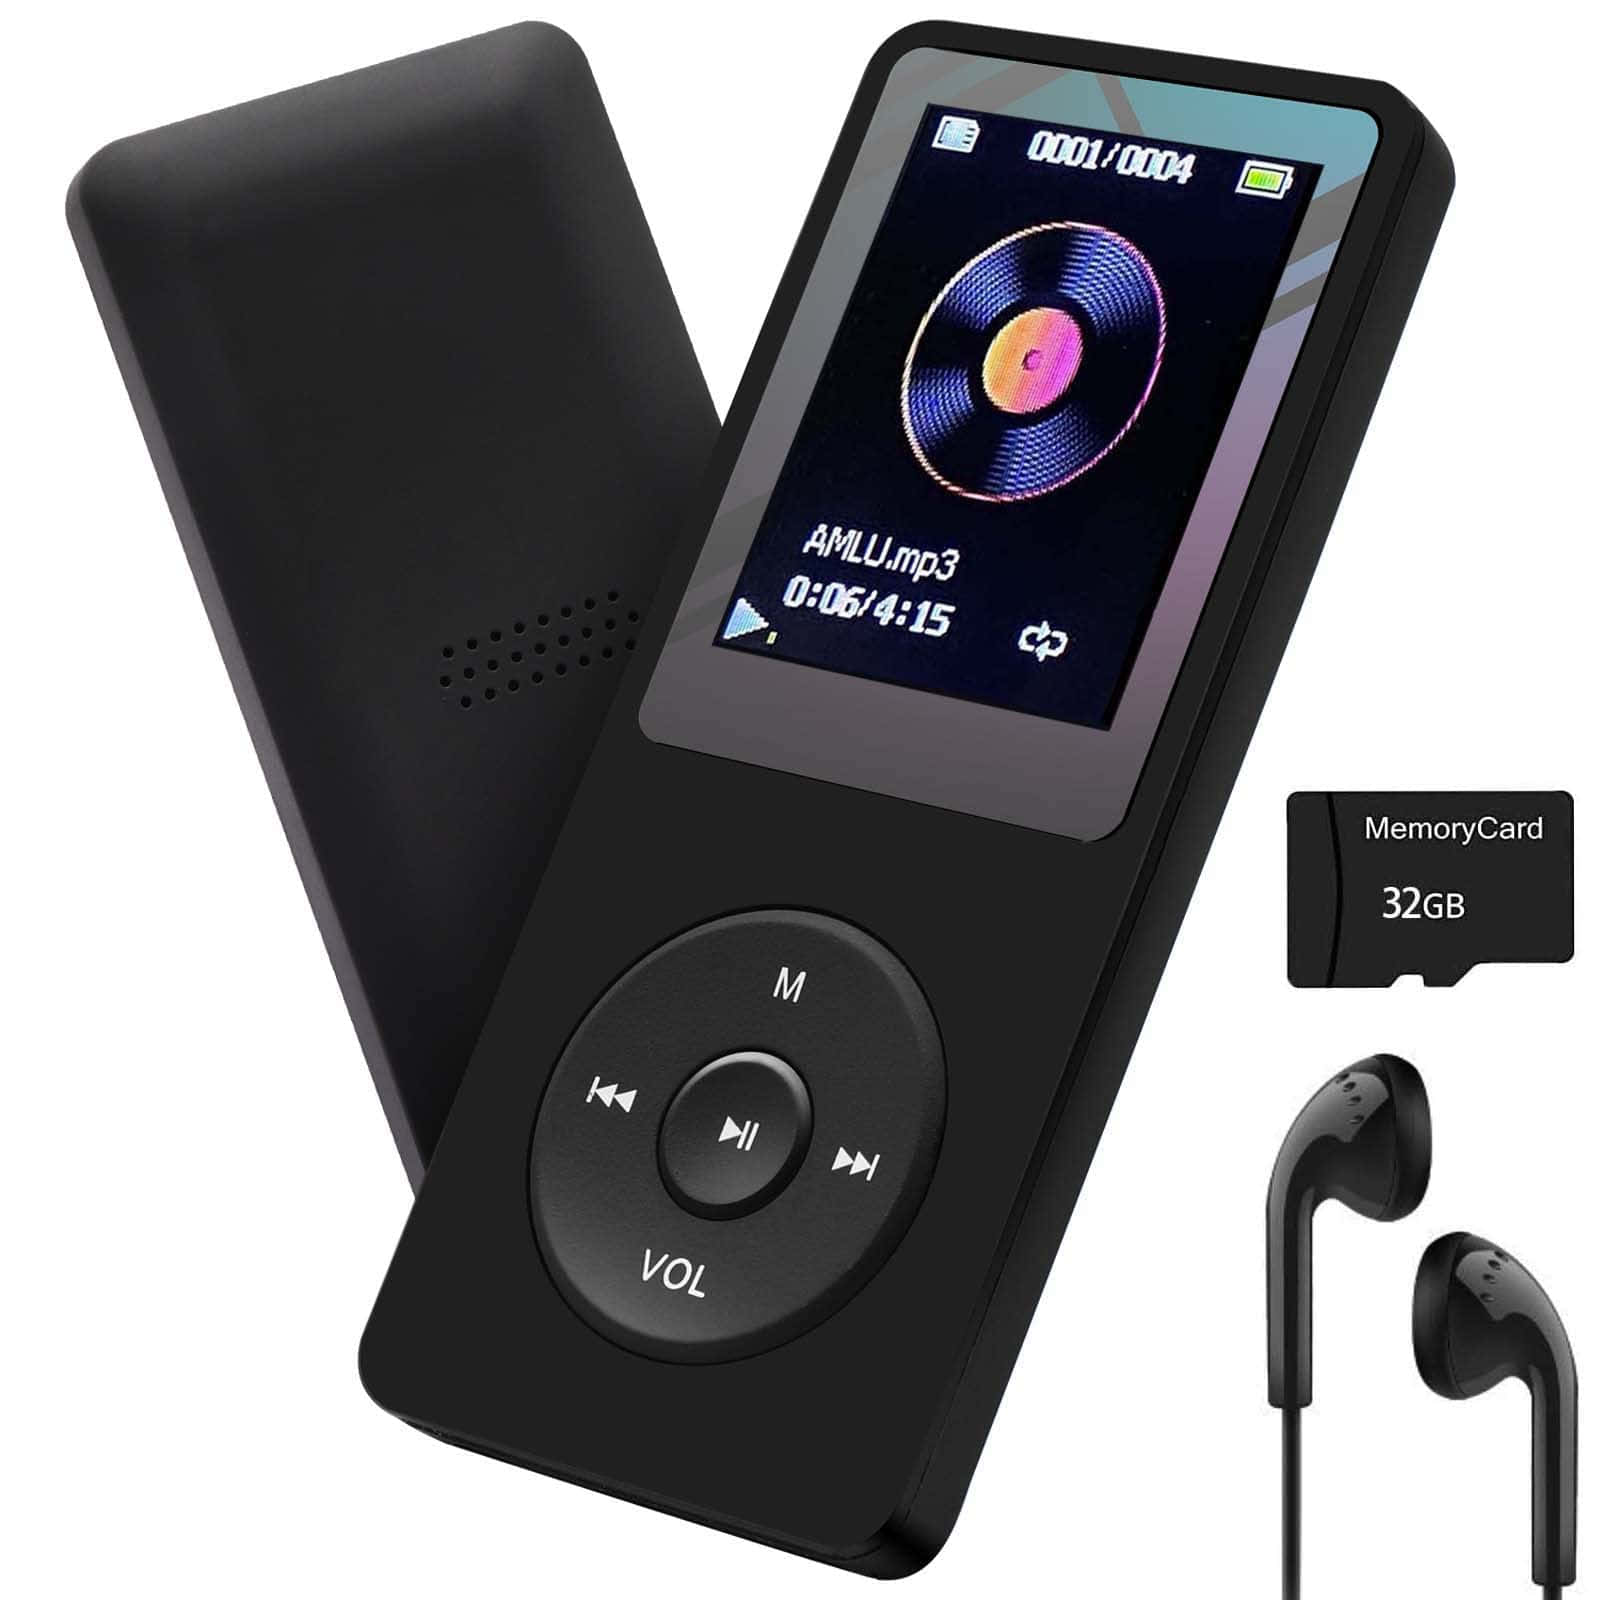 Shengshi Mp3 Player Pictures